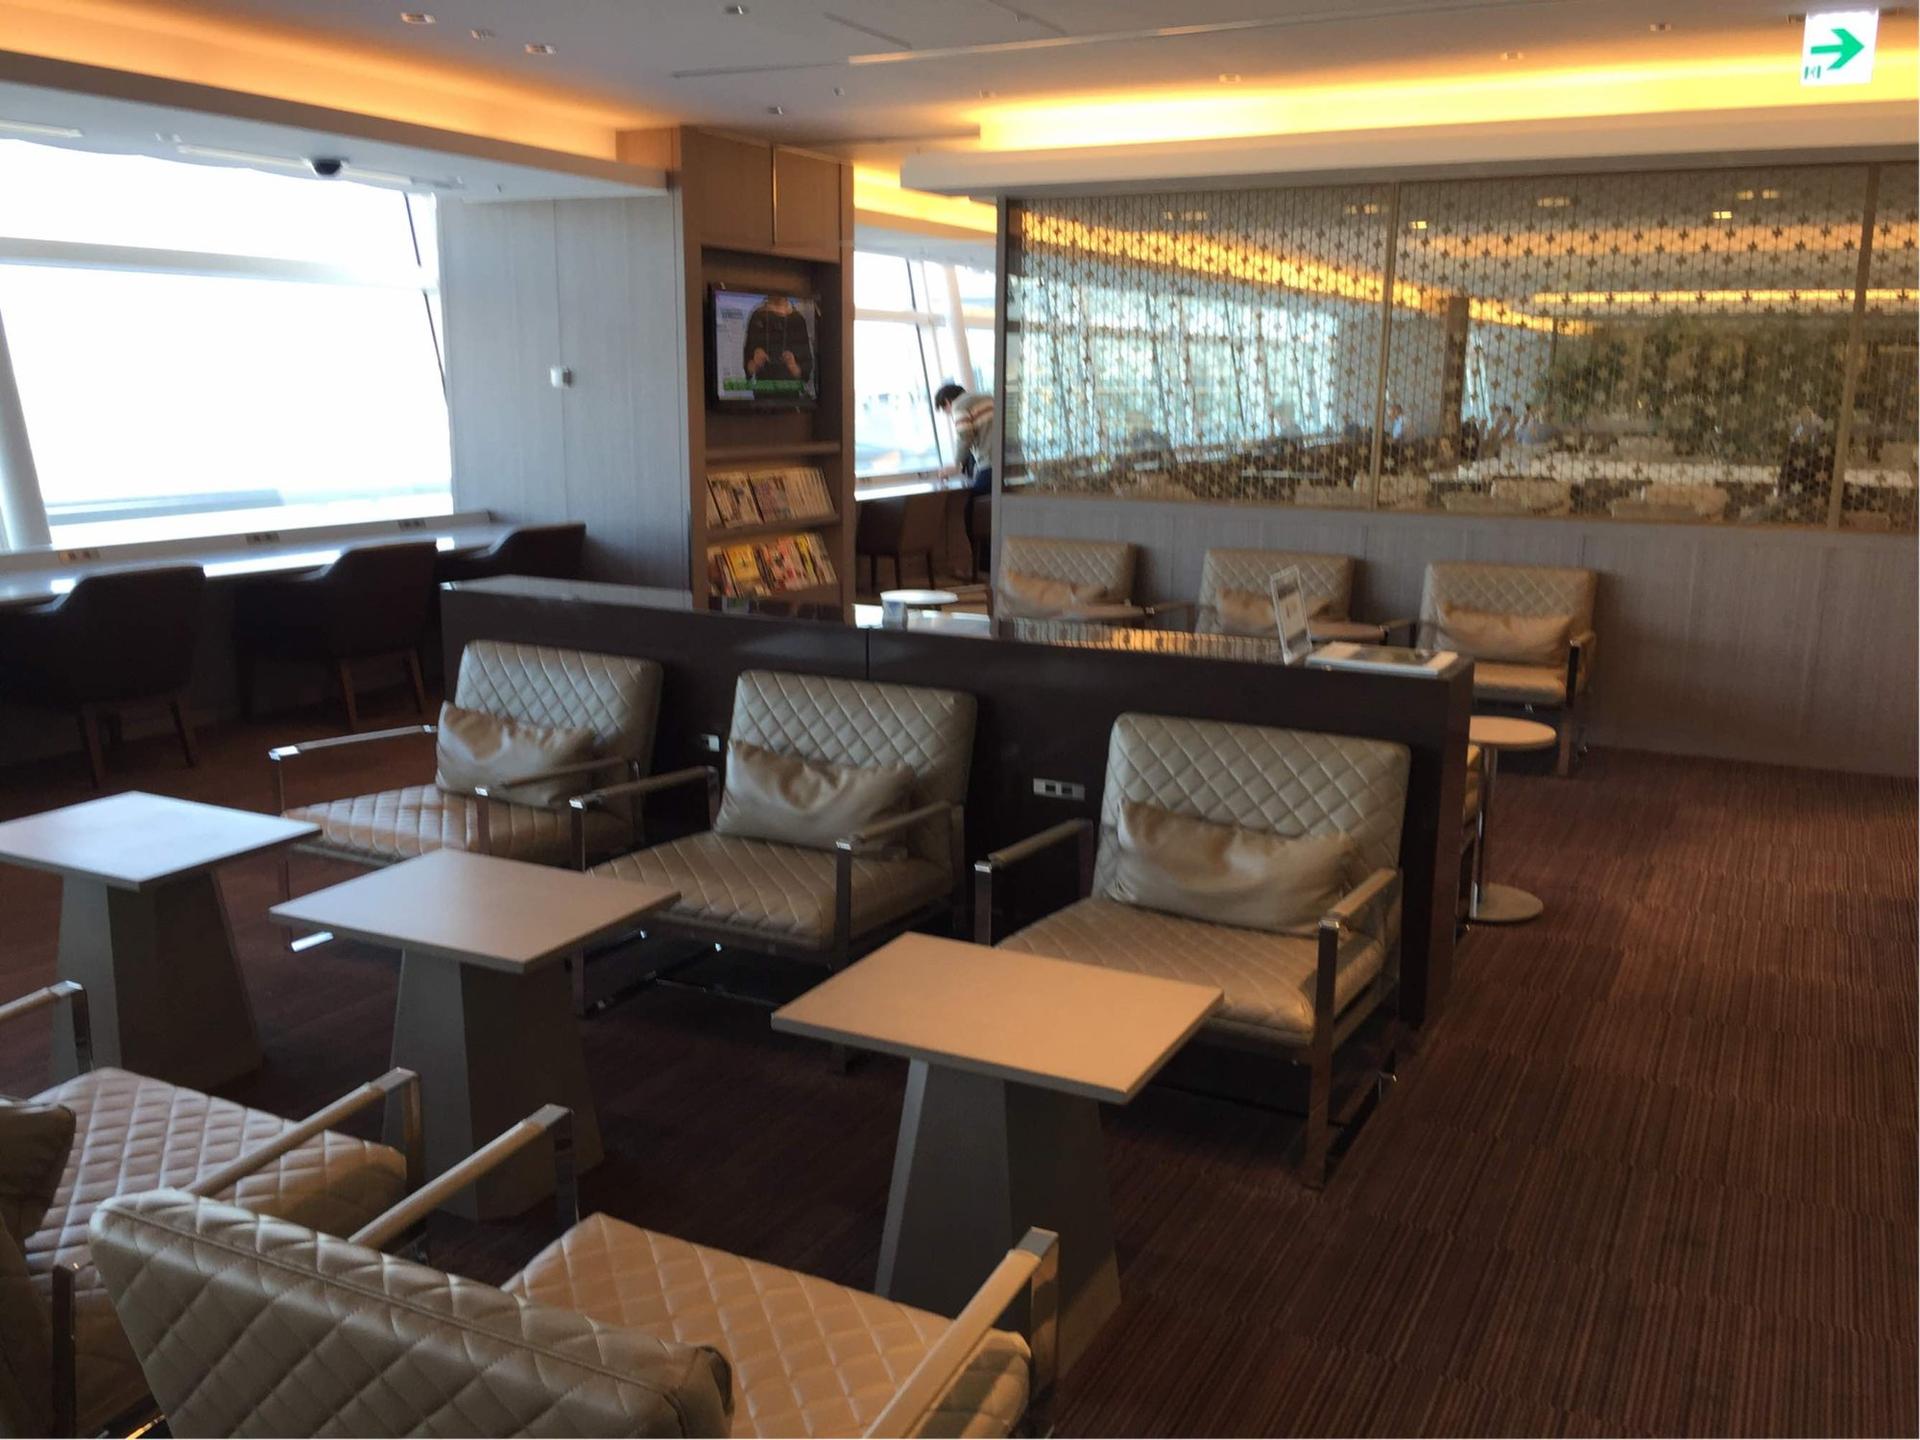 Japan Airlines JAL First Class Lounge image 20 of 43